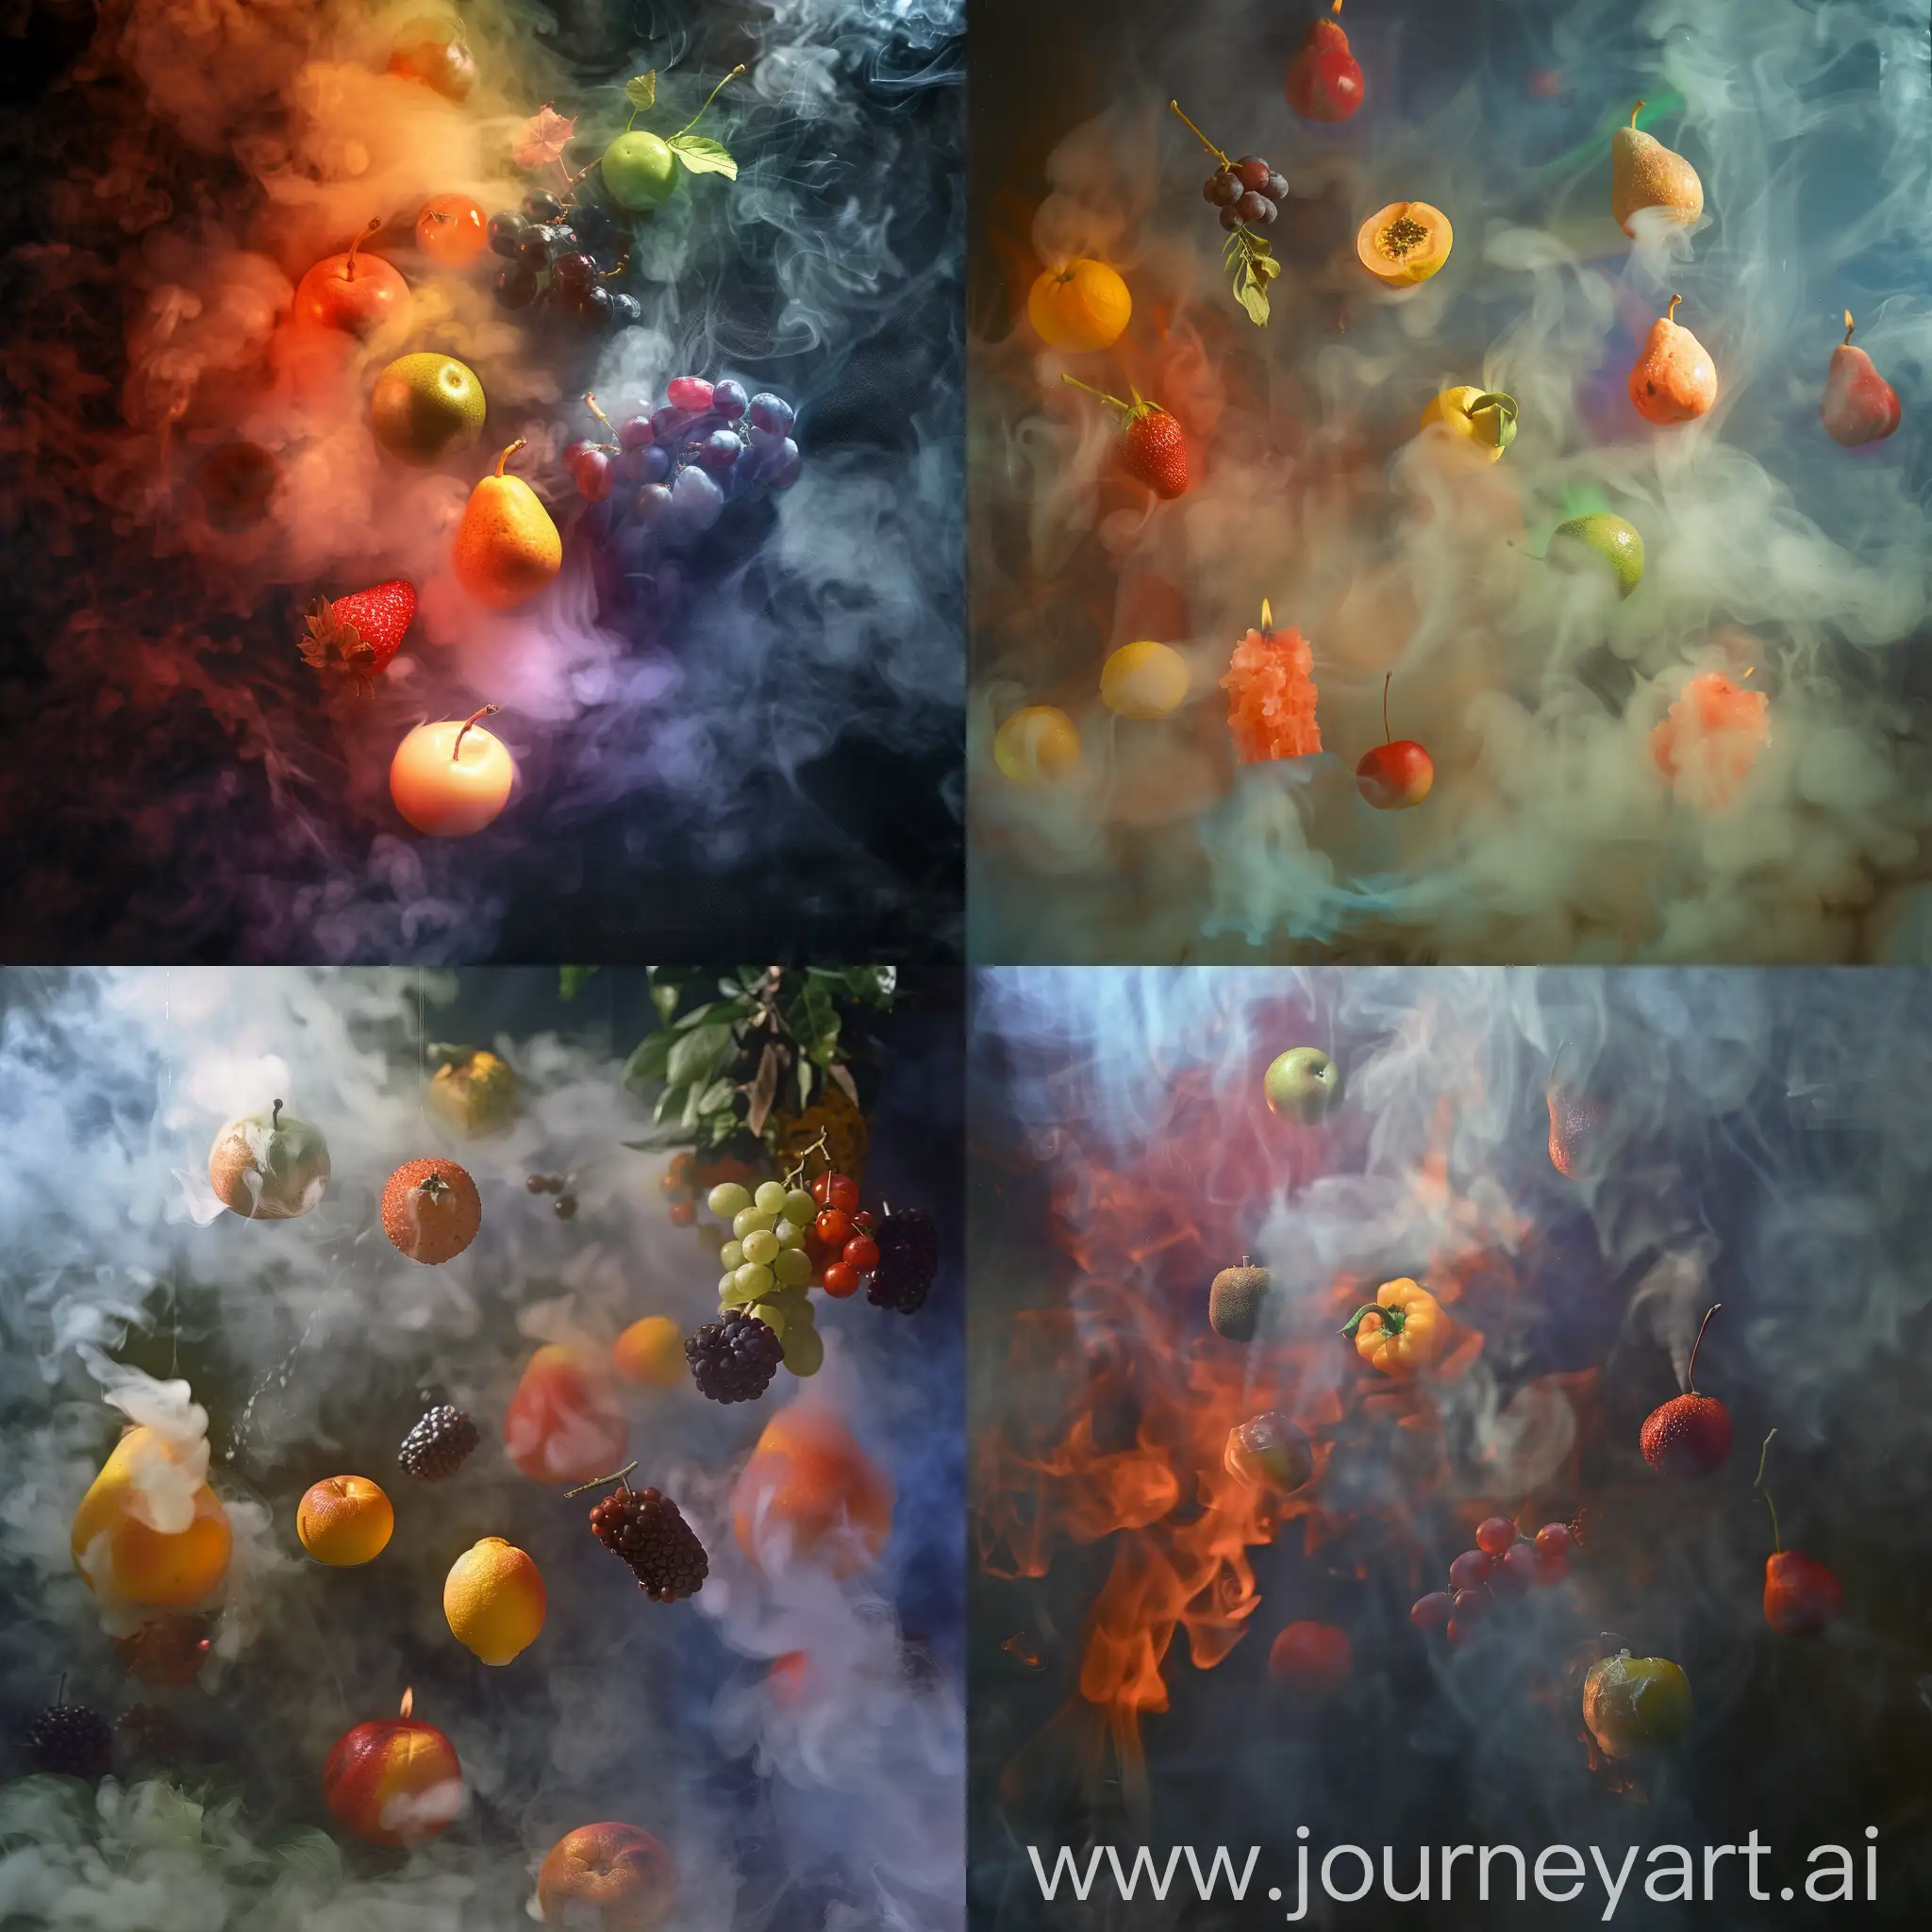 A captivating photograph of a marketplace candle card, where the smells of fruits create a ghostly halo of smoke, resembling a colored aura. The card features an intriguing composition, with the ghostly images of various fruits floating in the dark foggy background. The image successfully captures a sense of contrast, showcasing the realistic photography and excellent quality of the scene, making it a visual delight.